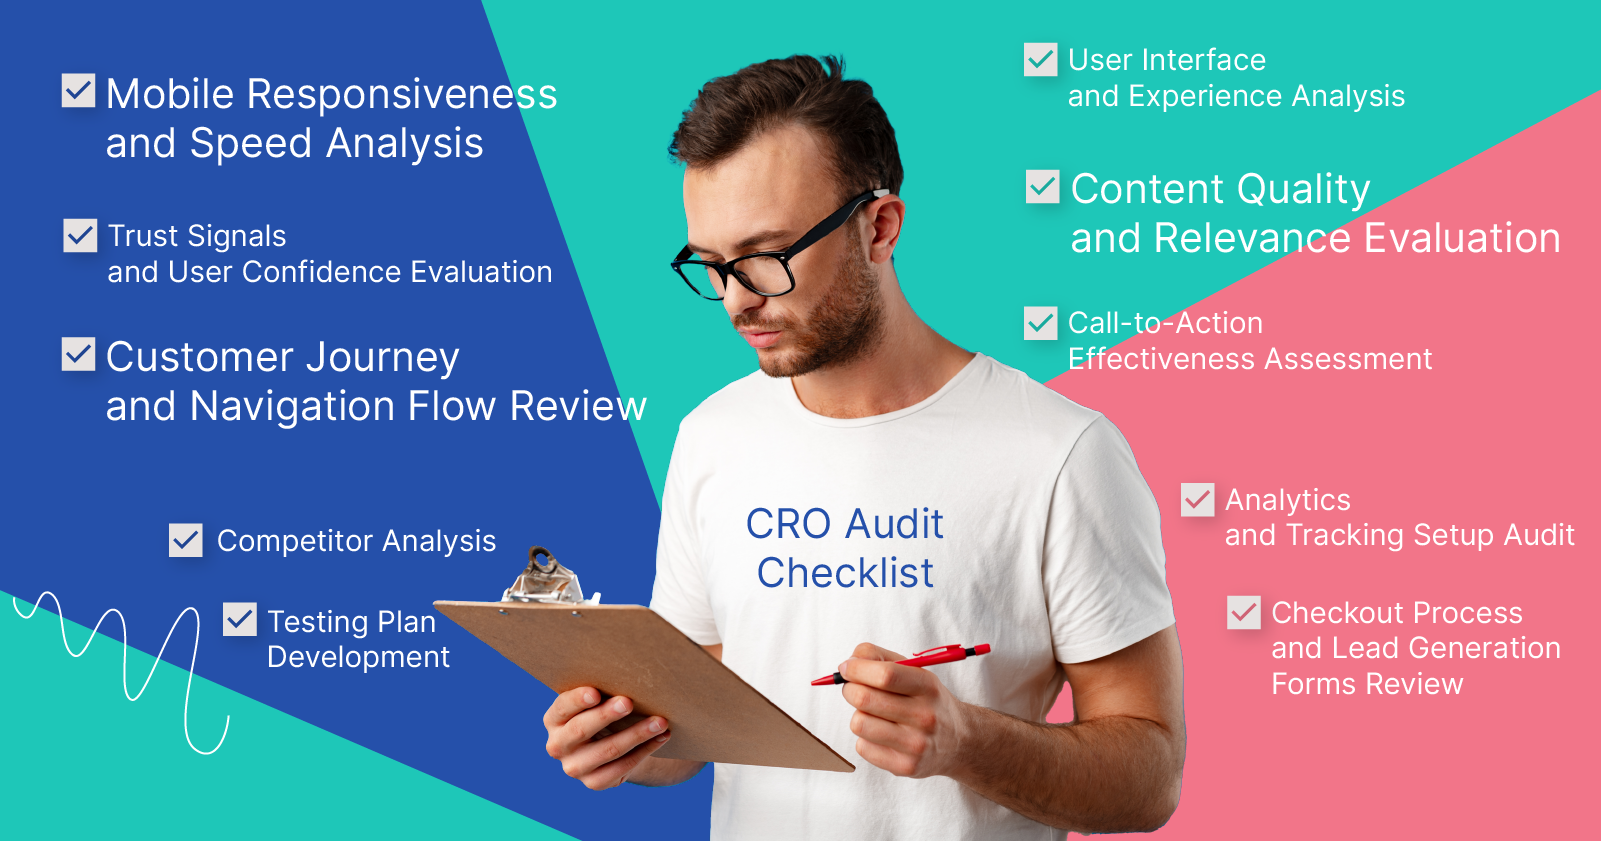 What Should Be Included In a CRO Audit 10-step checklist